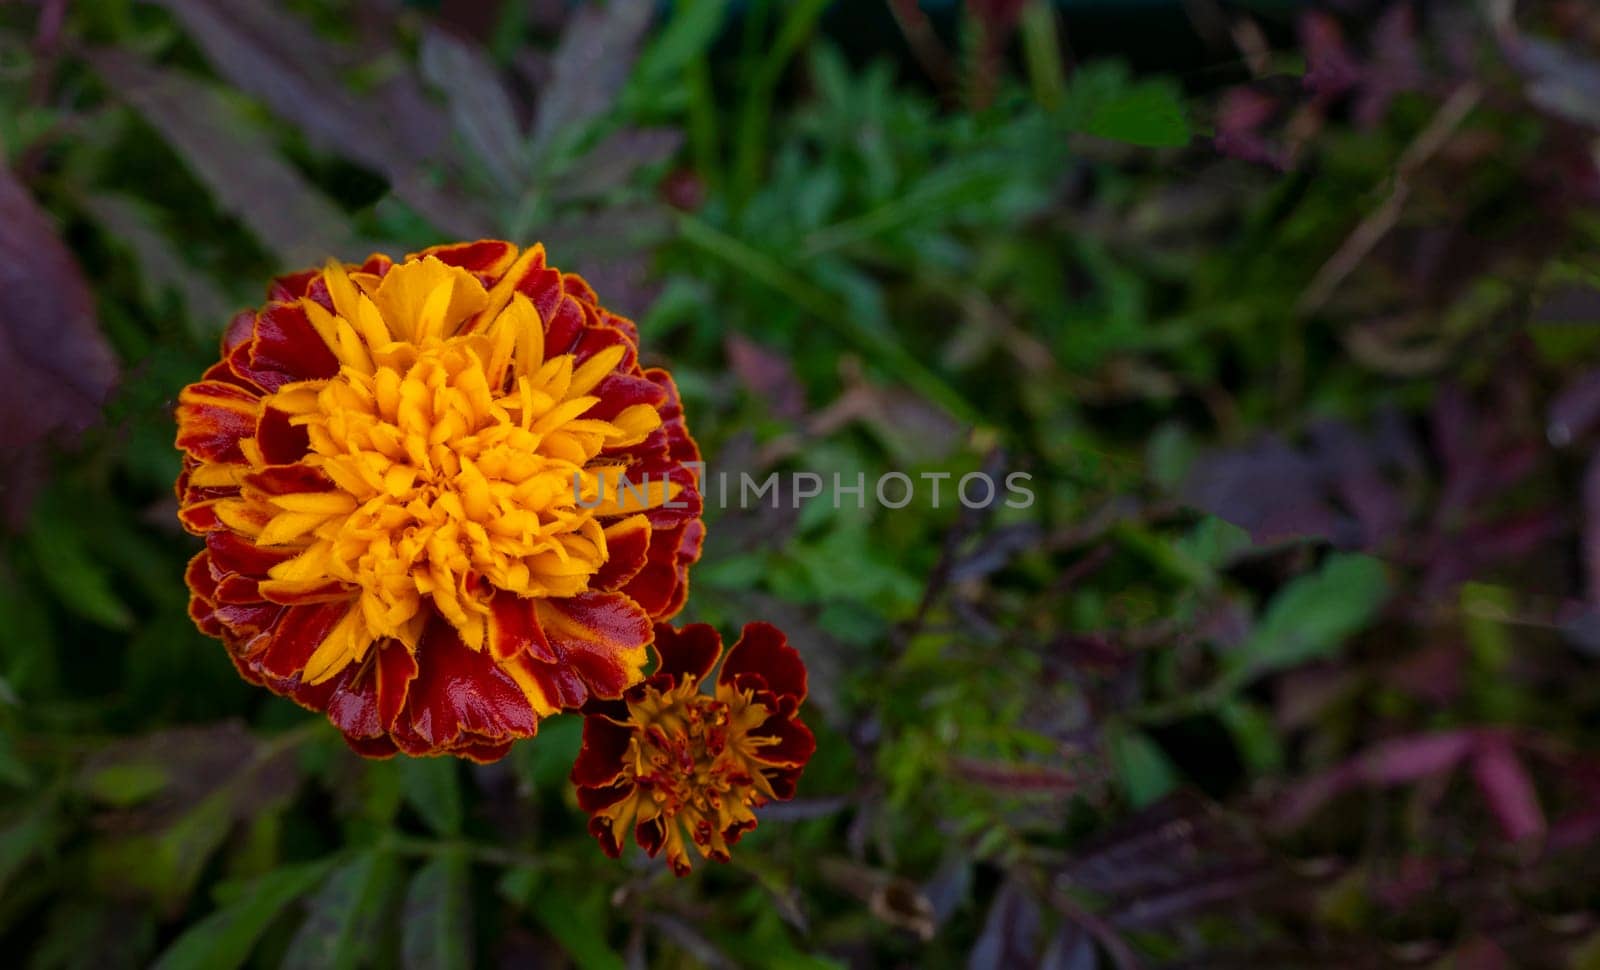 Marigold. Tagetes garden flowers in closeup shot. Ornamental yellow and orange petaled blossoms. Vibrant gardening image in spring. copy space, postcard